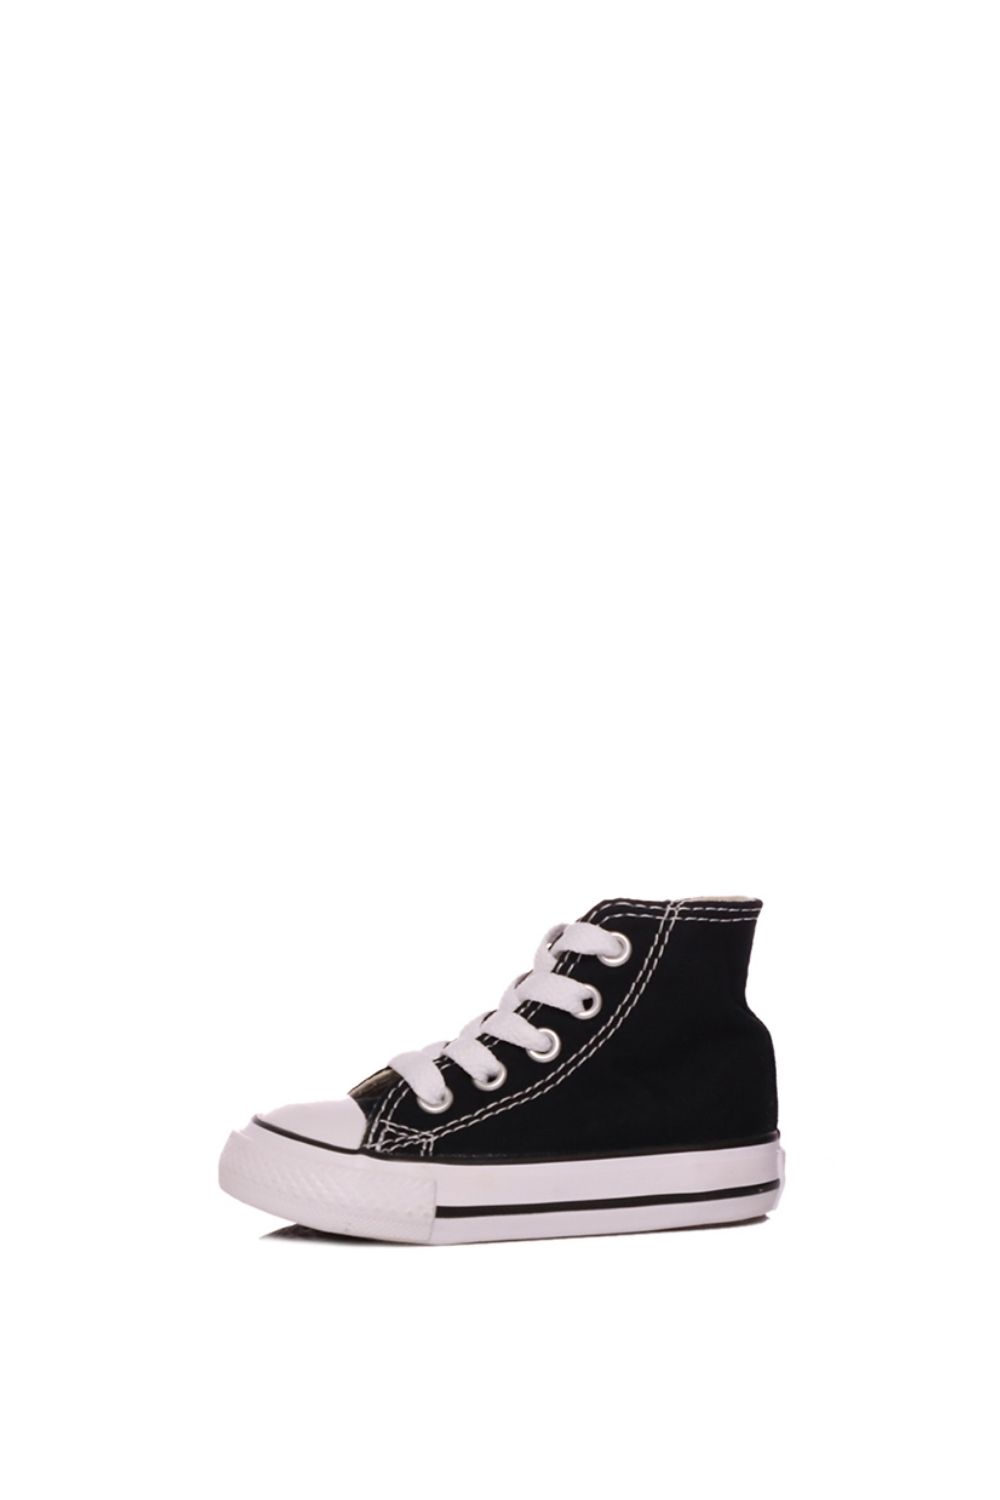 CONVERSE - Βρεφικά μποτάκια Chuck Taylor All Star Hi μαύρα Παιδικά/Baby/Παπούτσια/Sneakers